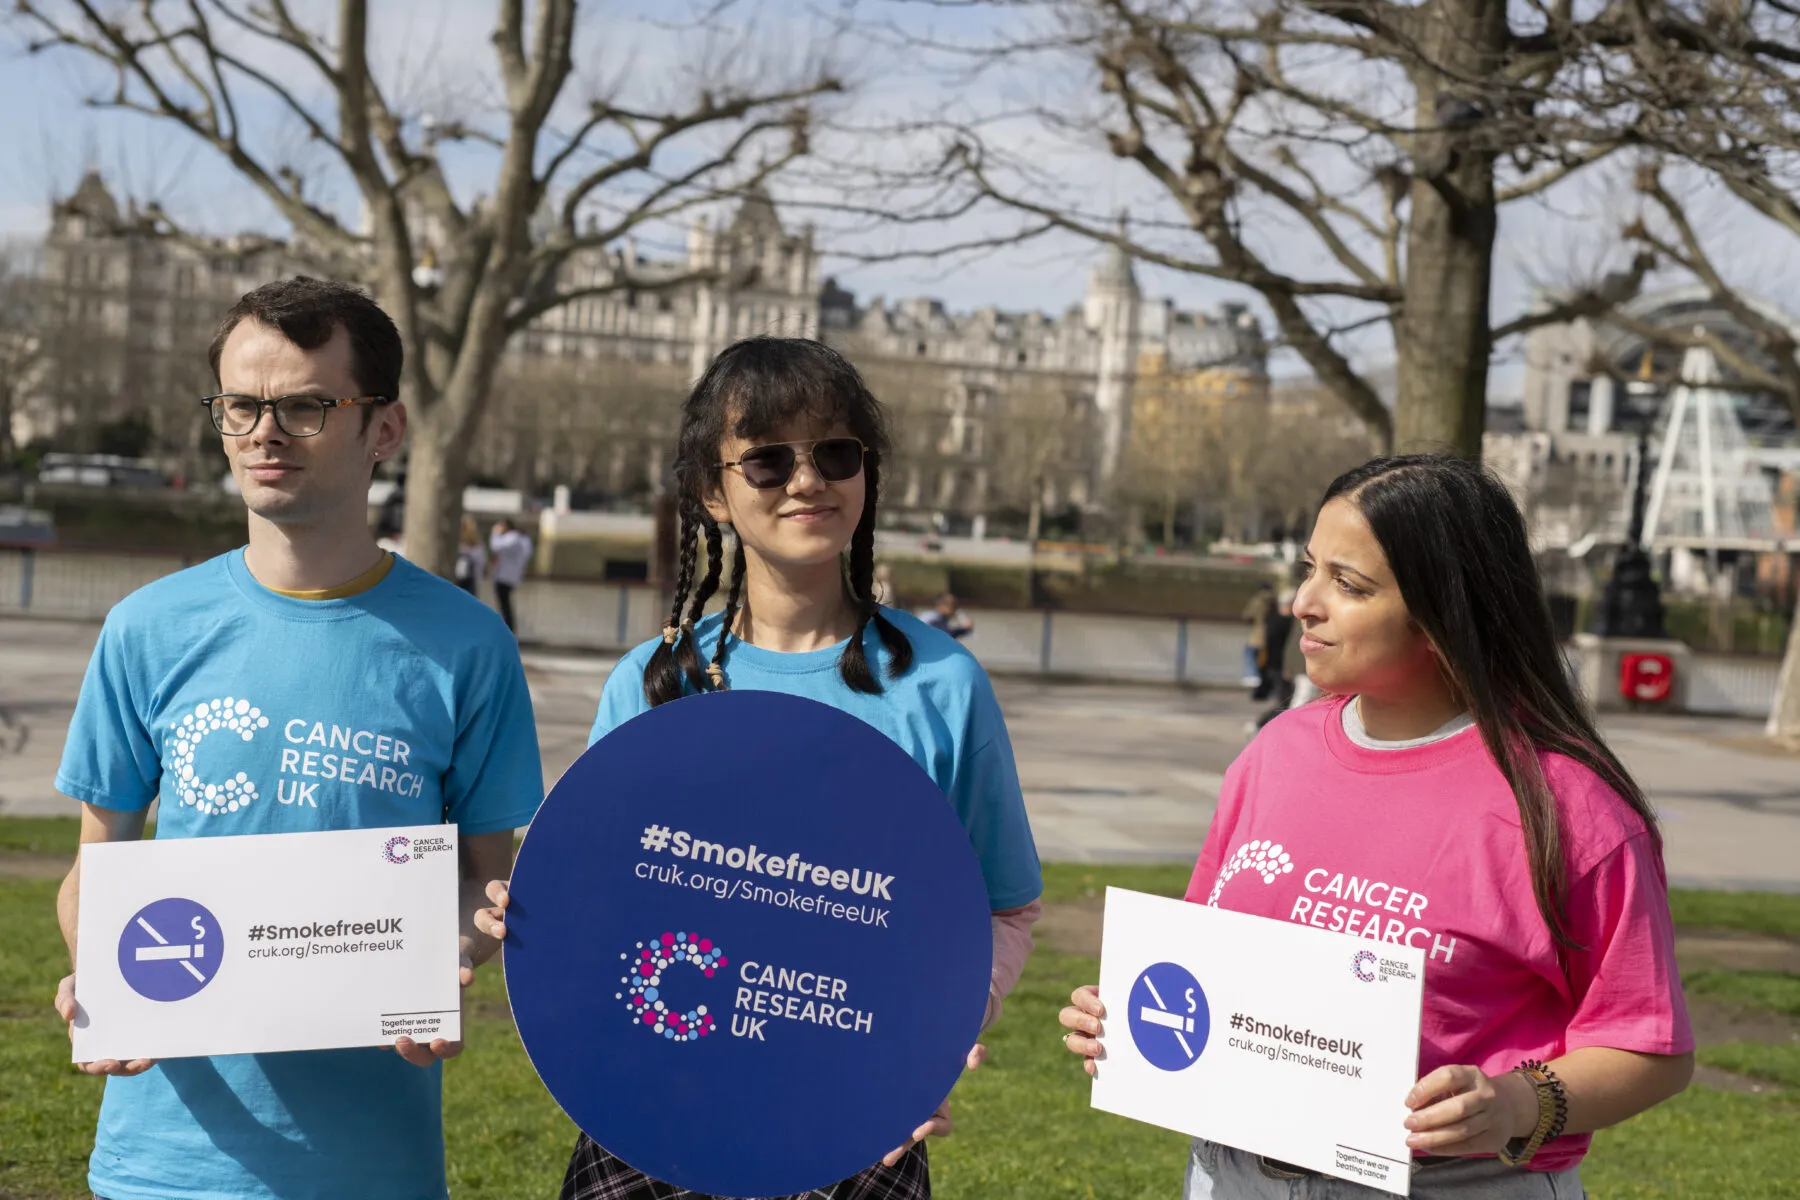 Savyata (middle) with two other campaigns ambassadors at a SmokefreeUK campaign event